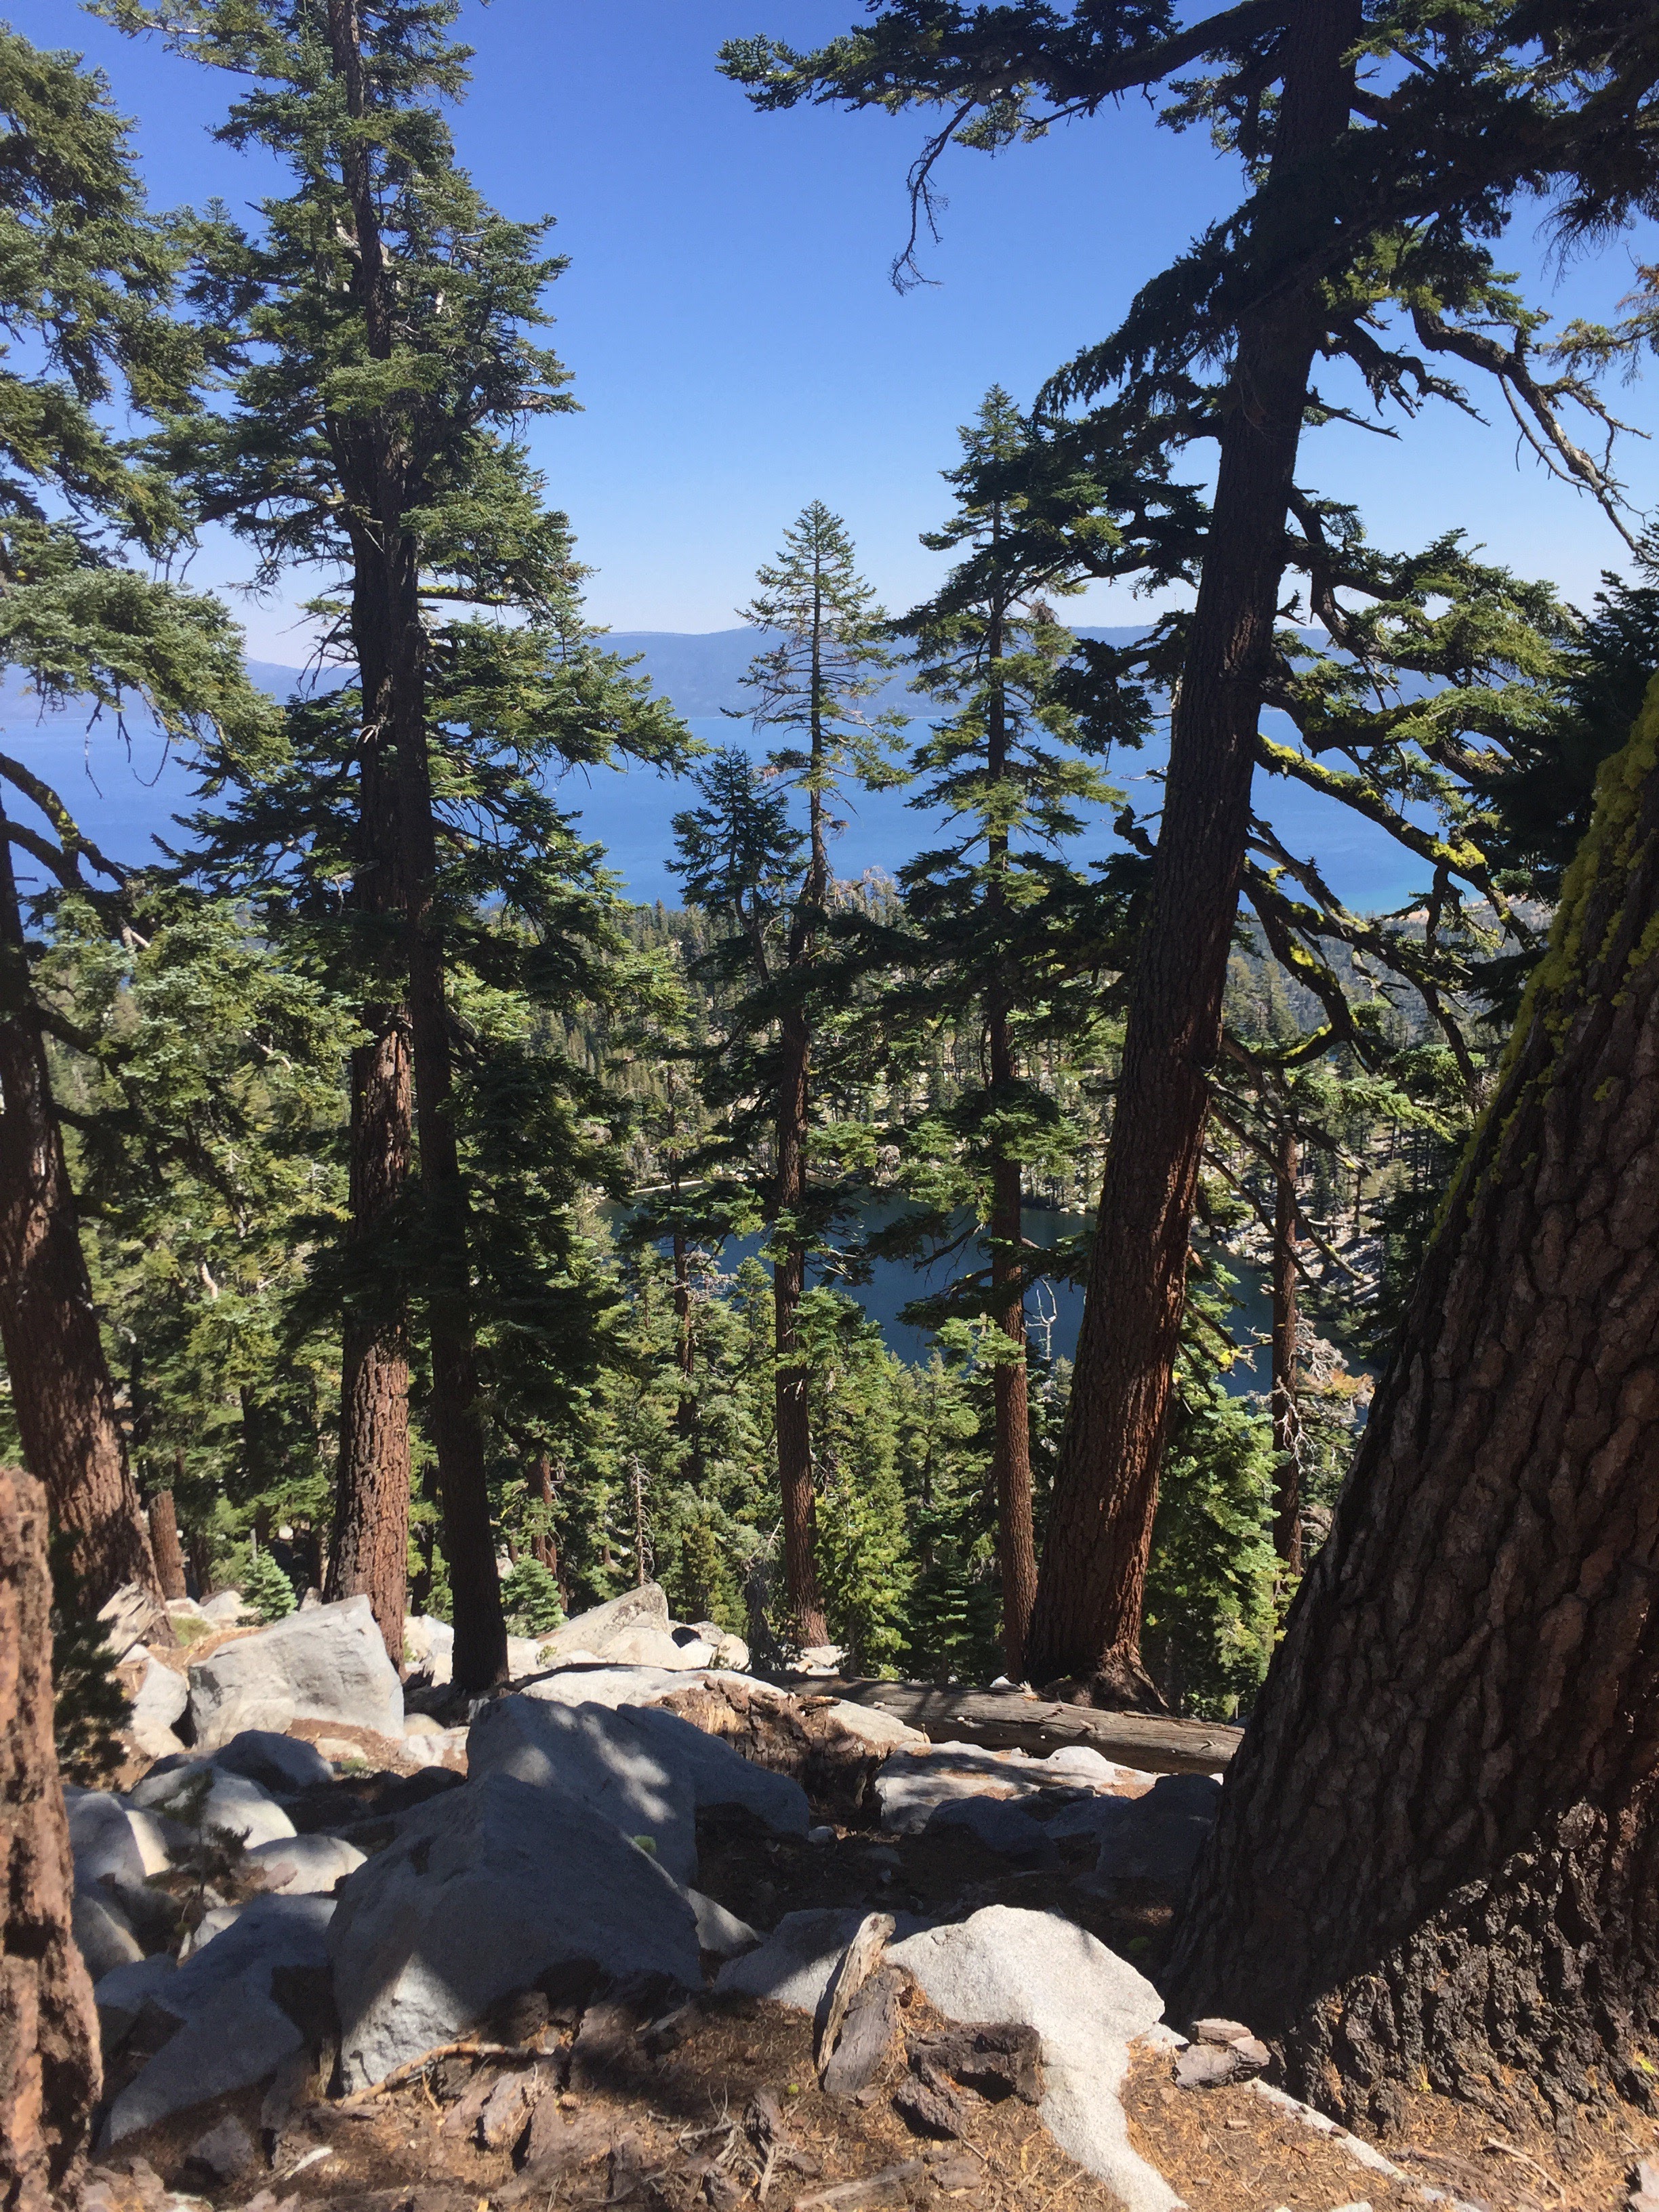 Another view of Granite Lake below, and Lake Tahoe in the distance. 8/25/2016